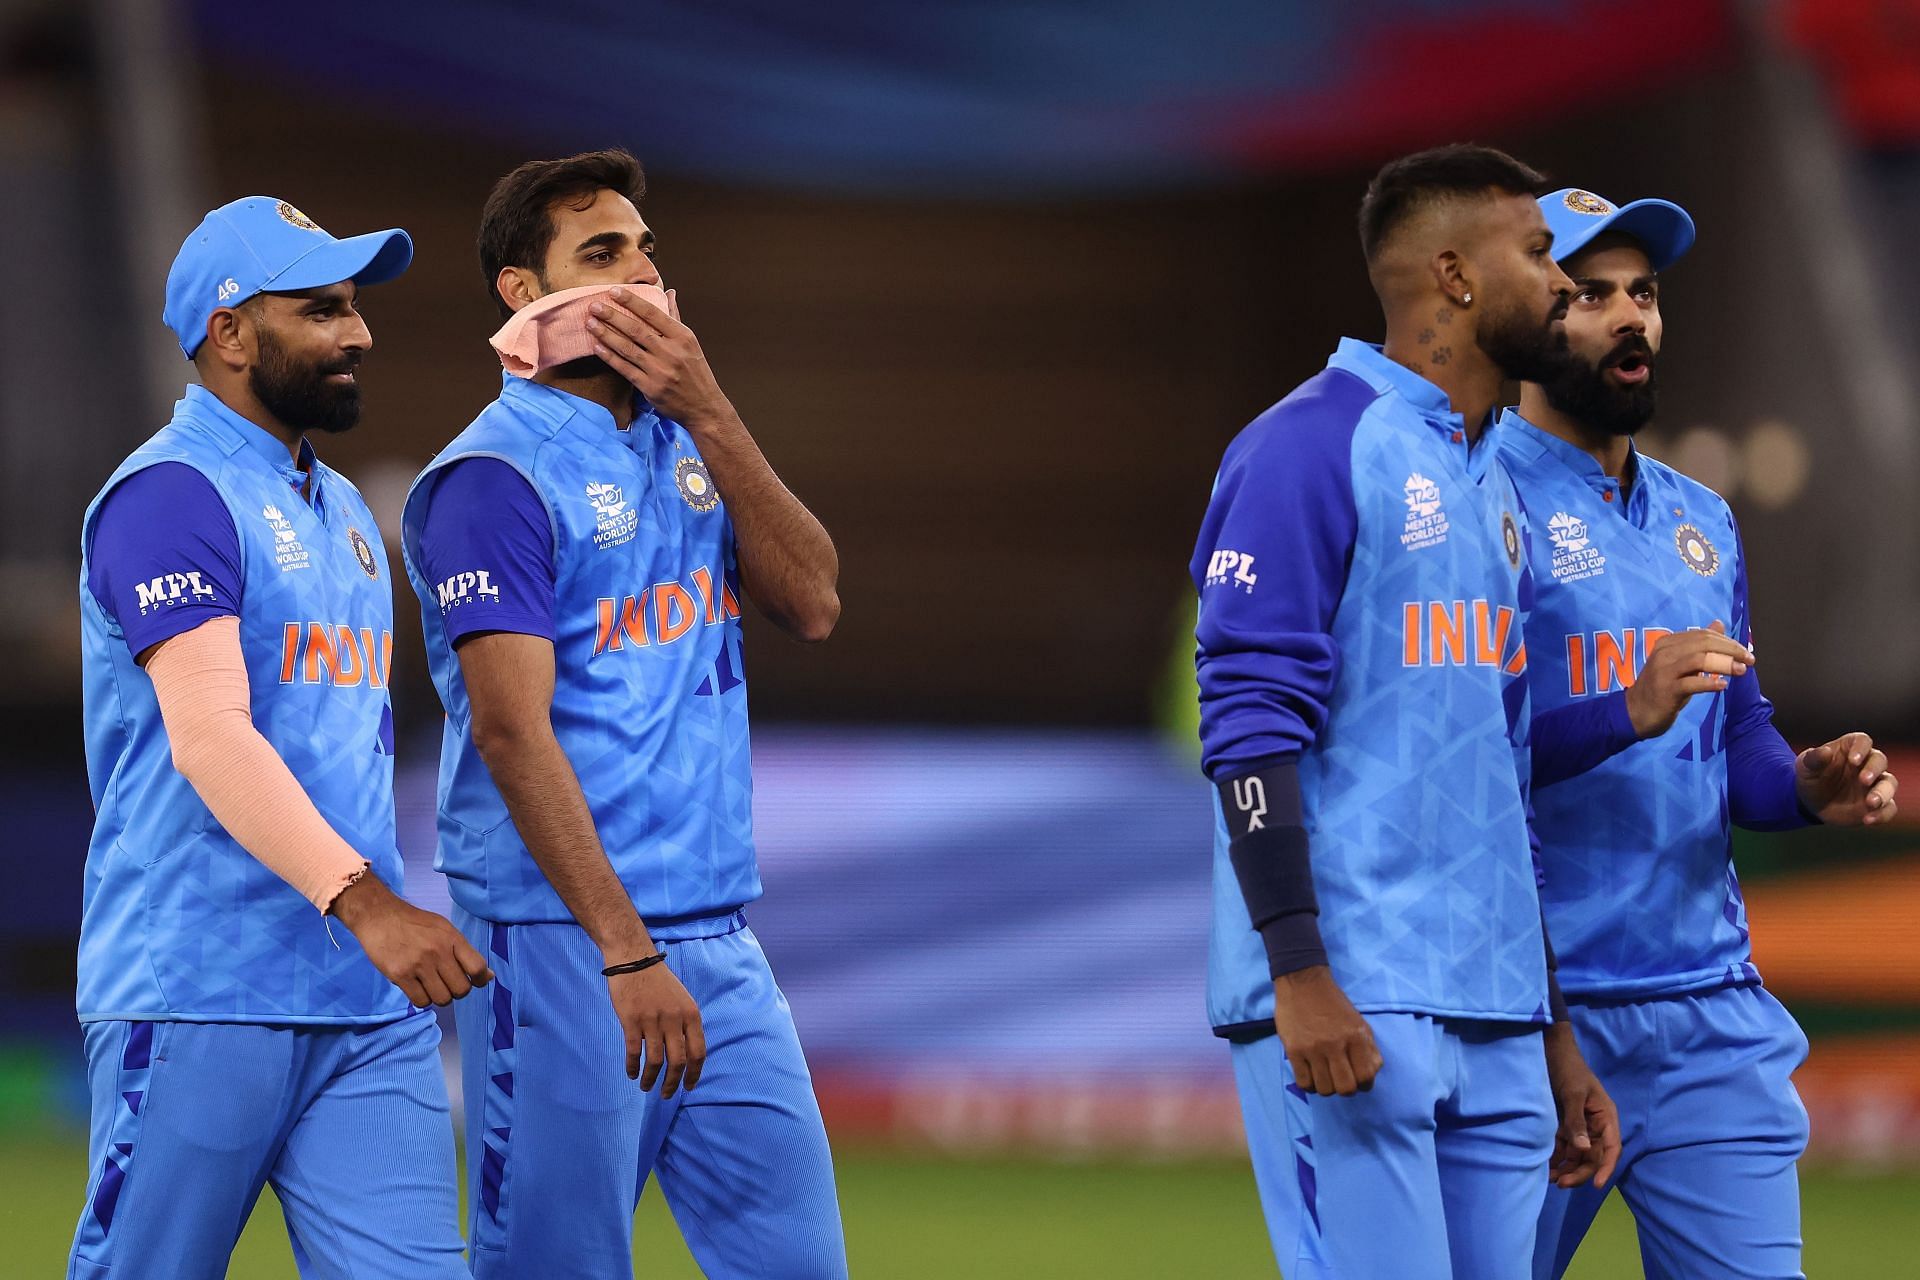 India once again fell at the knockout stages